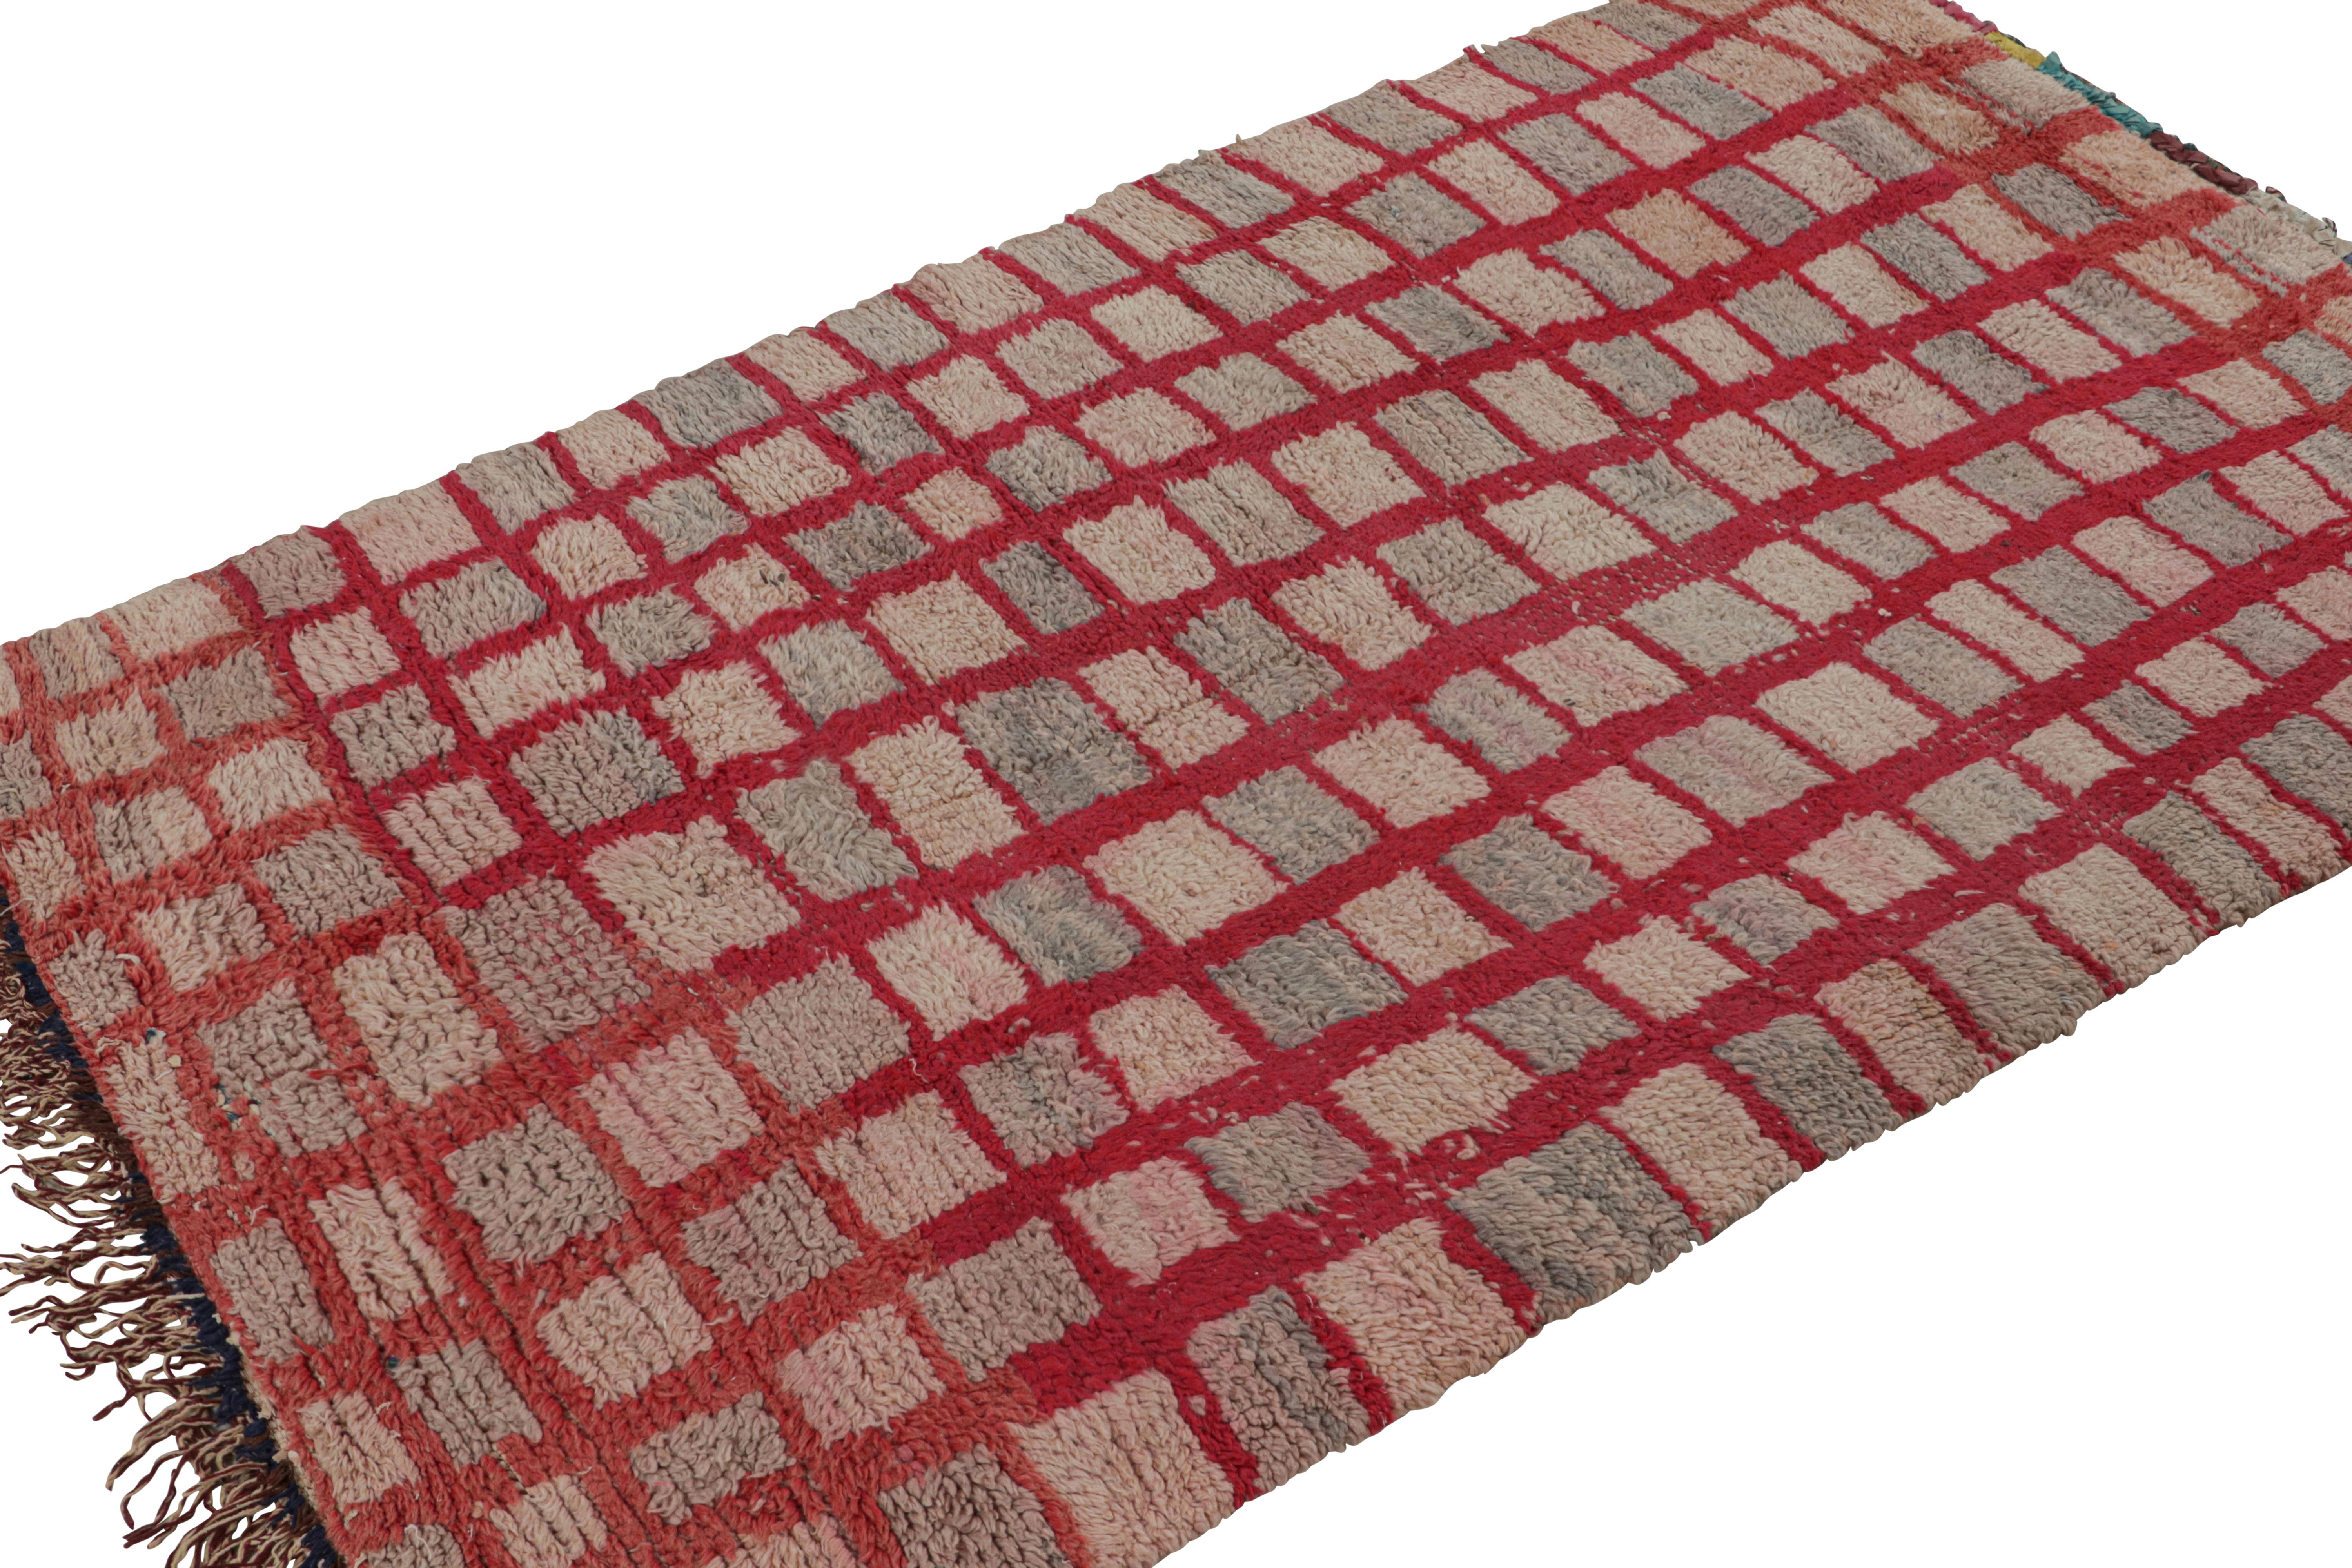 Hand-knotted in wool circa 1950-1960, this 4x7 vintage Moroccan rug with grid geometric patterns, hails from the Azilal tribe.  

On the Design: 

Connoisseurs may admire this rug as a bold, graphic piece with drama and gravity—a work of presence